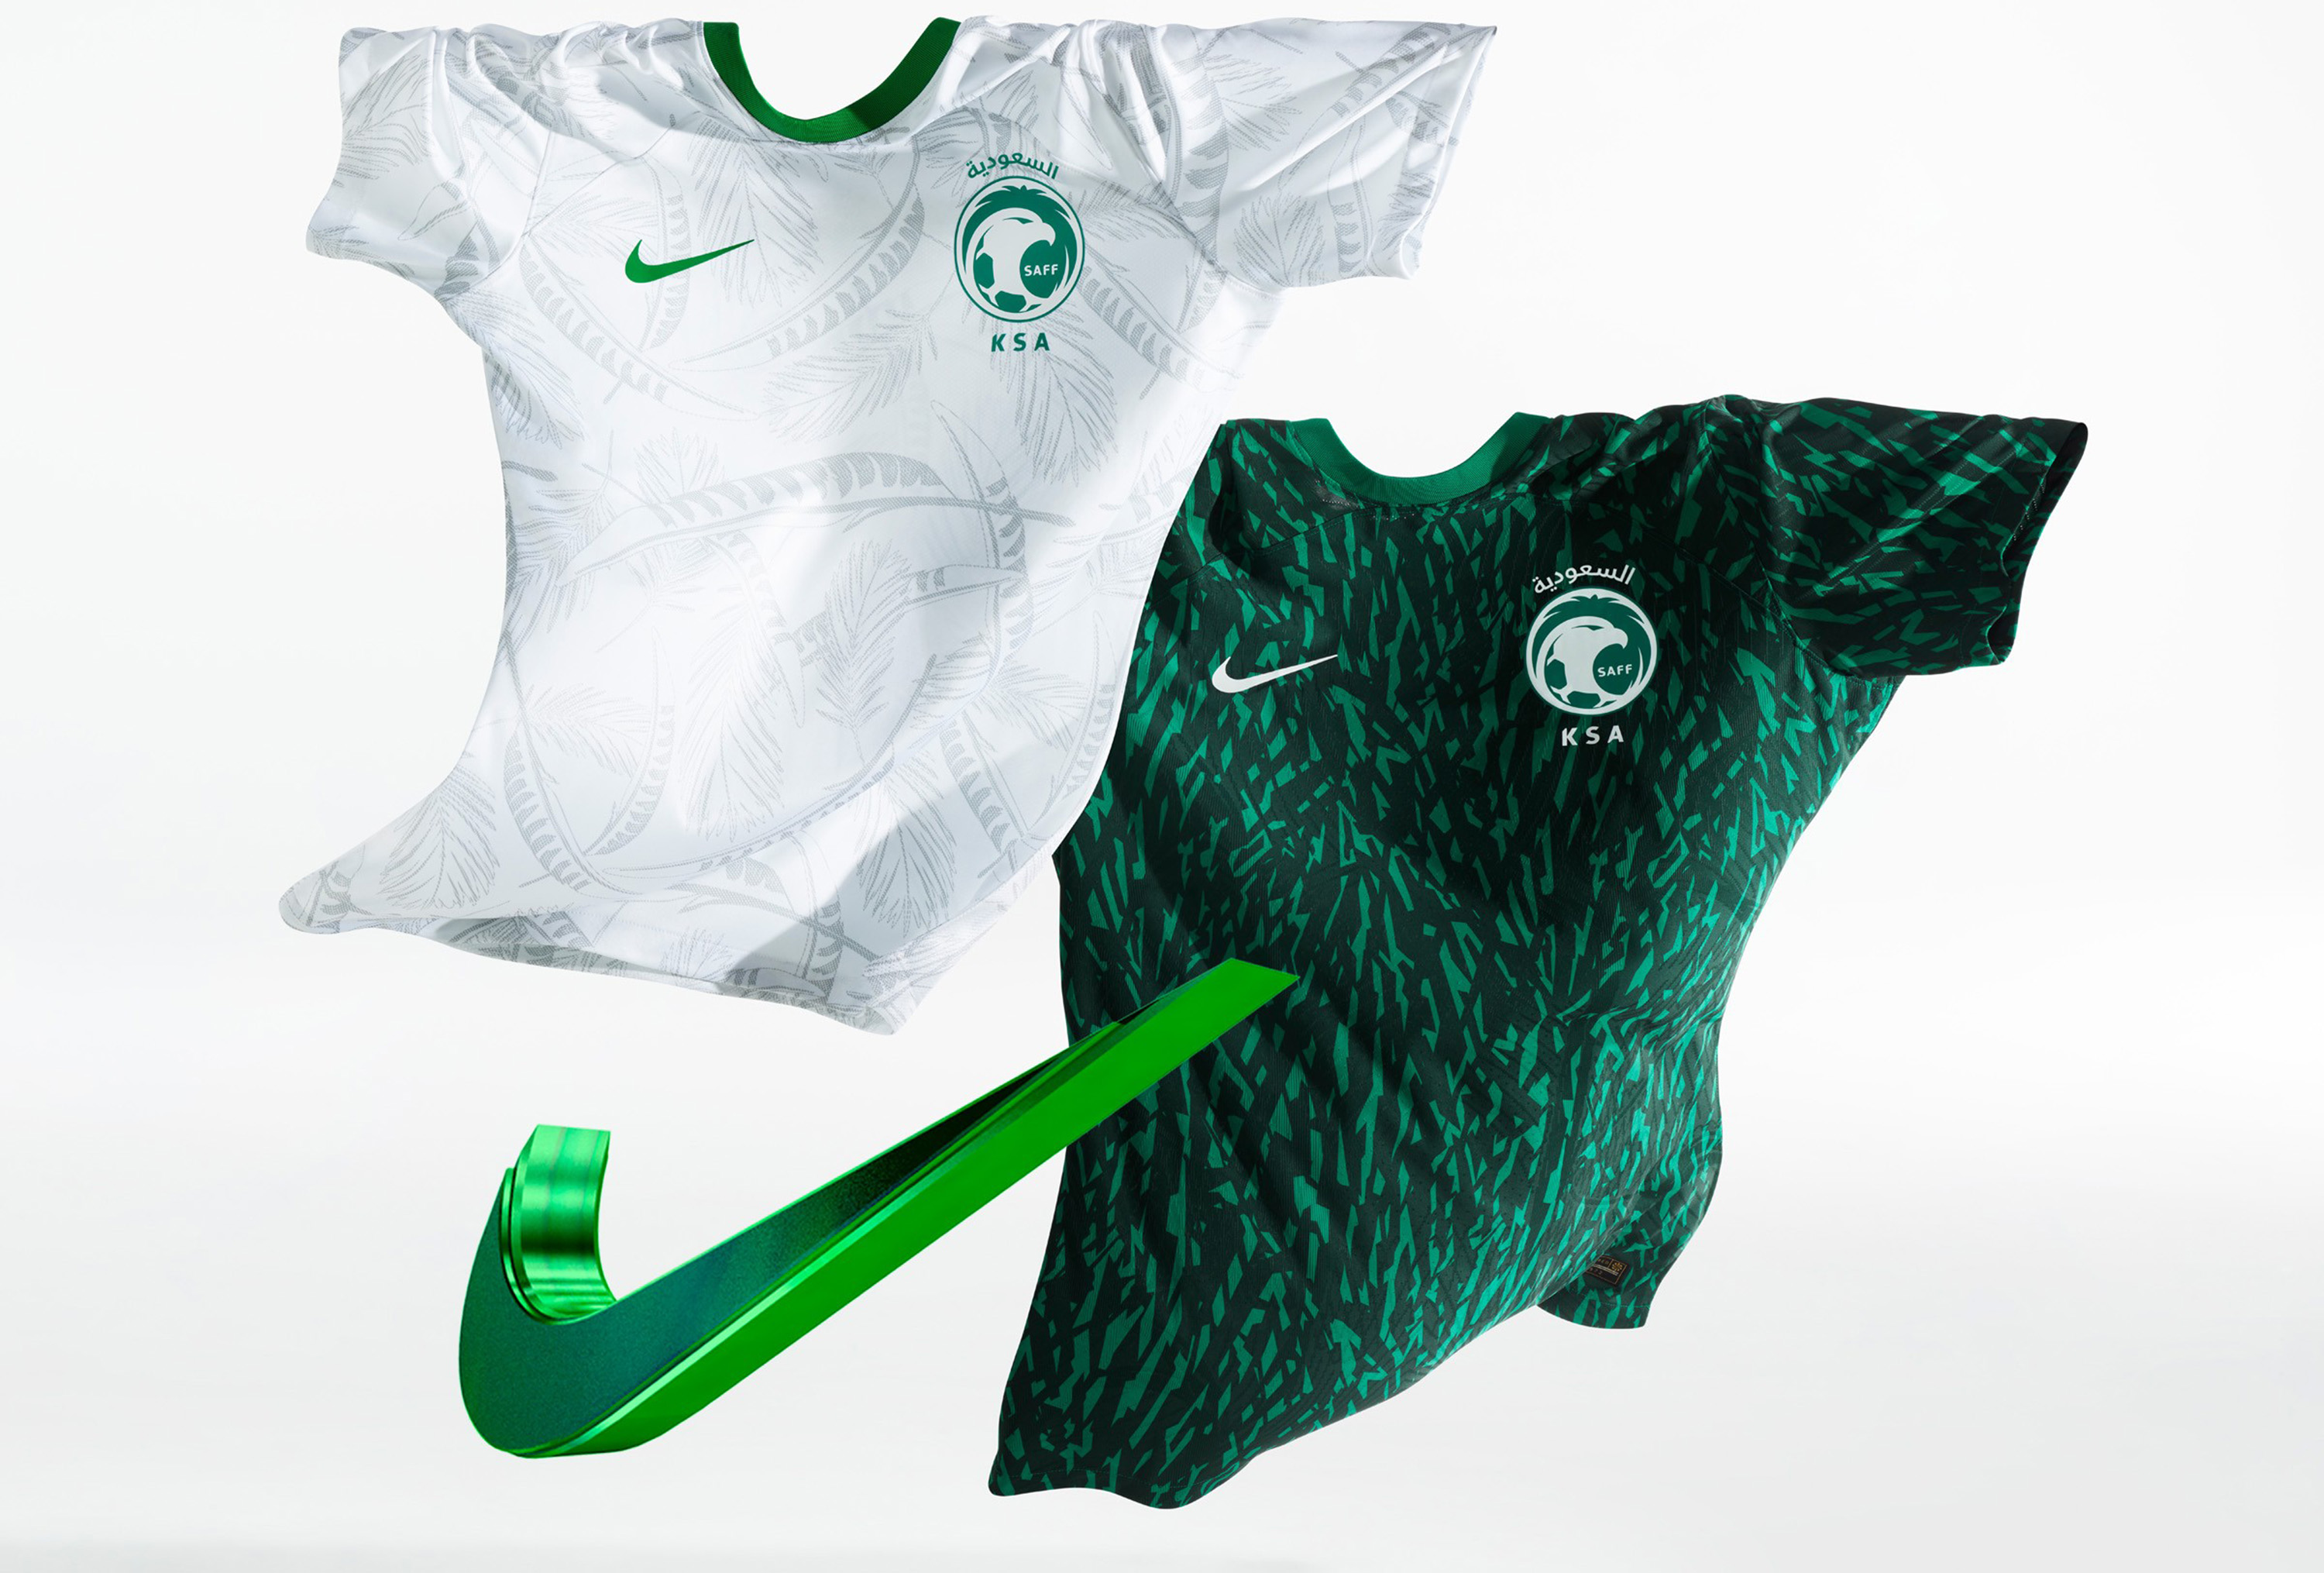 Nike's World Cup kits - United States, Netherlands miss the mark